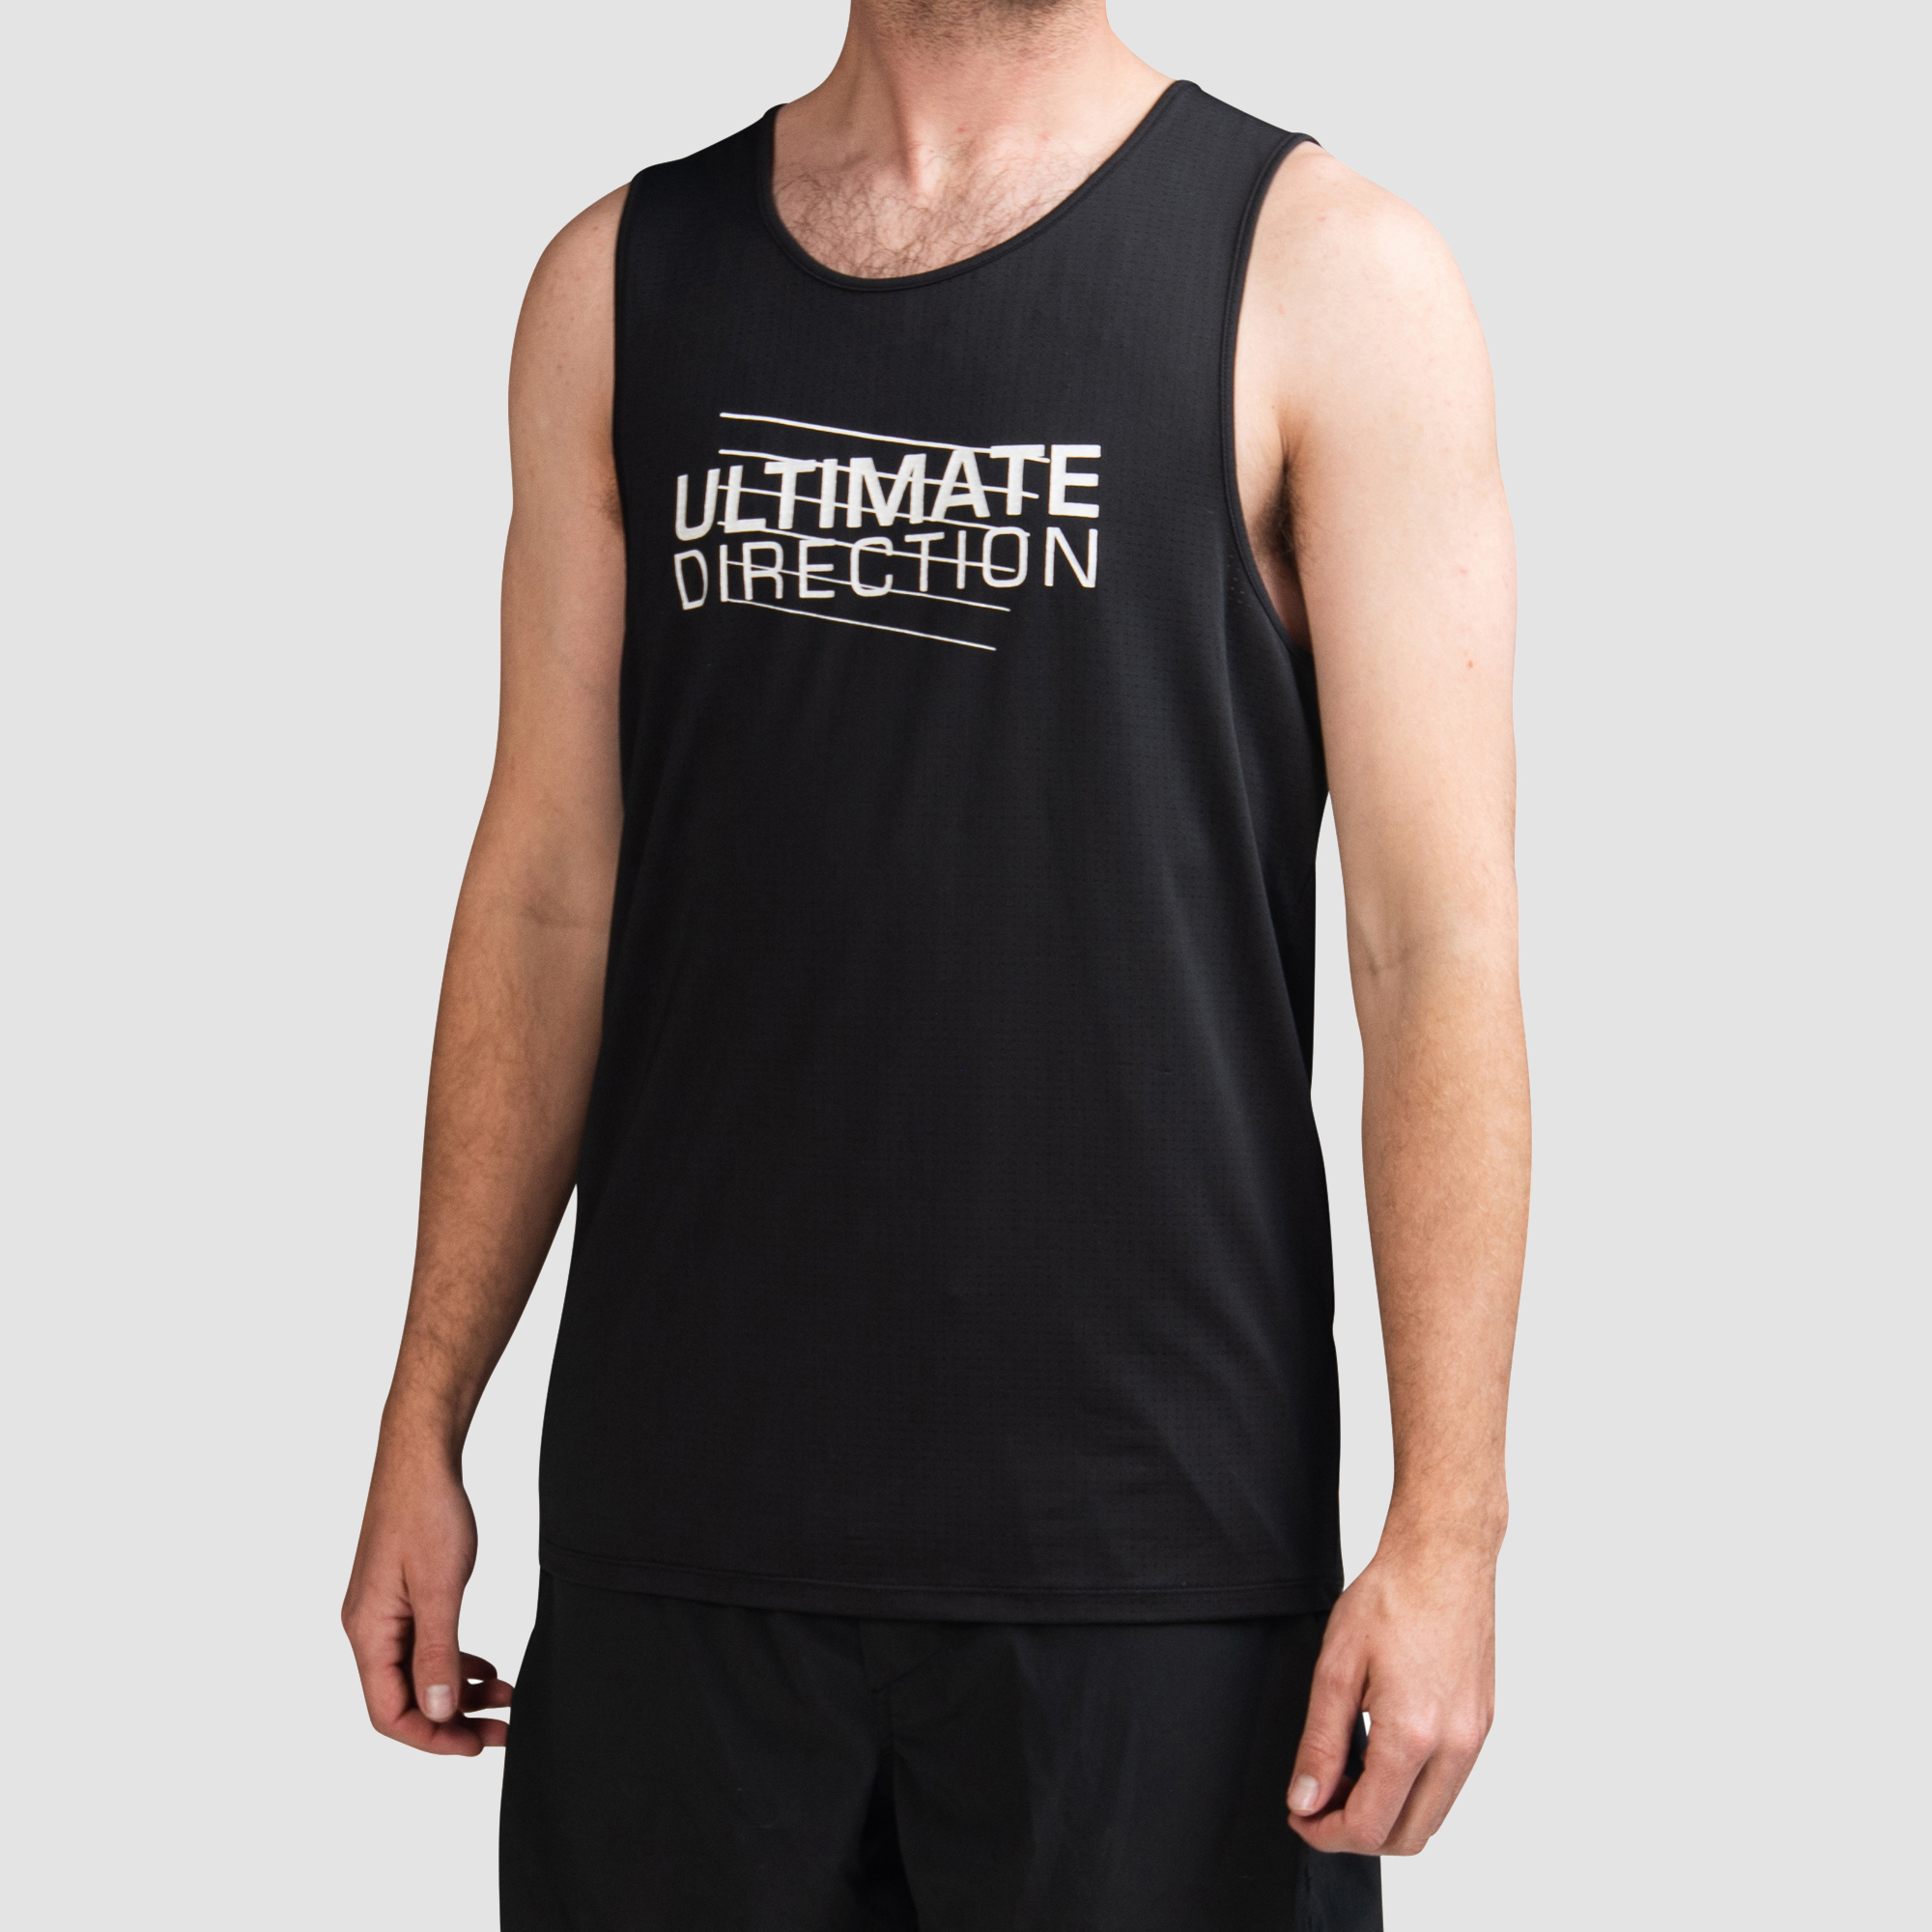 Ultimate Direction Men's Tech Tank Top in Onyx Size Large